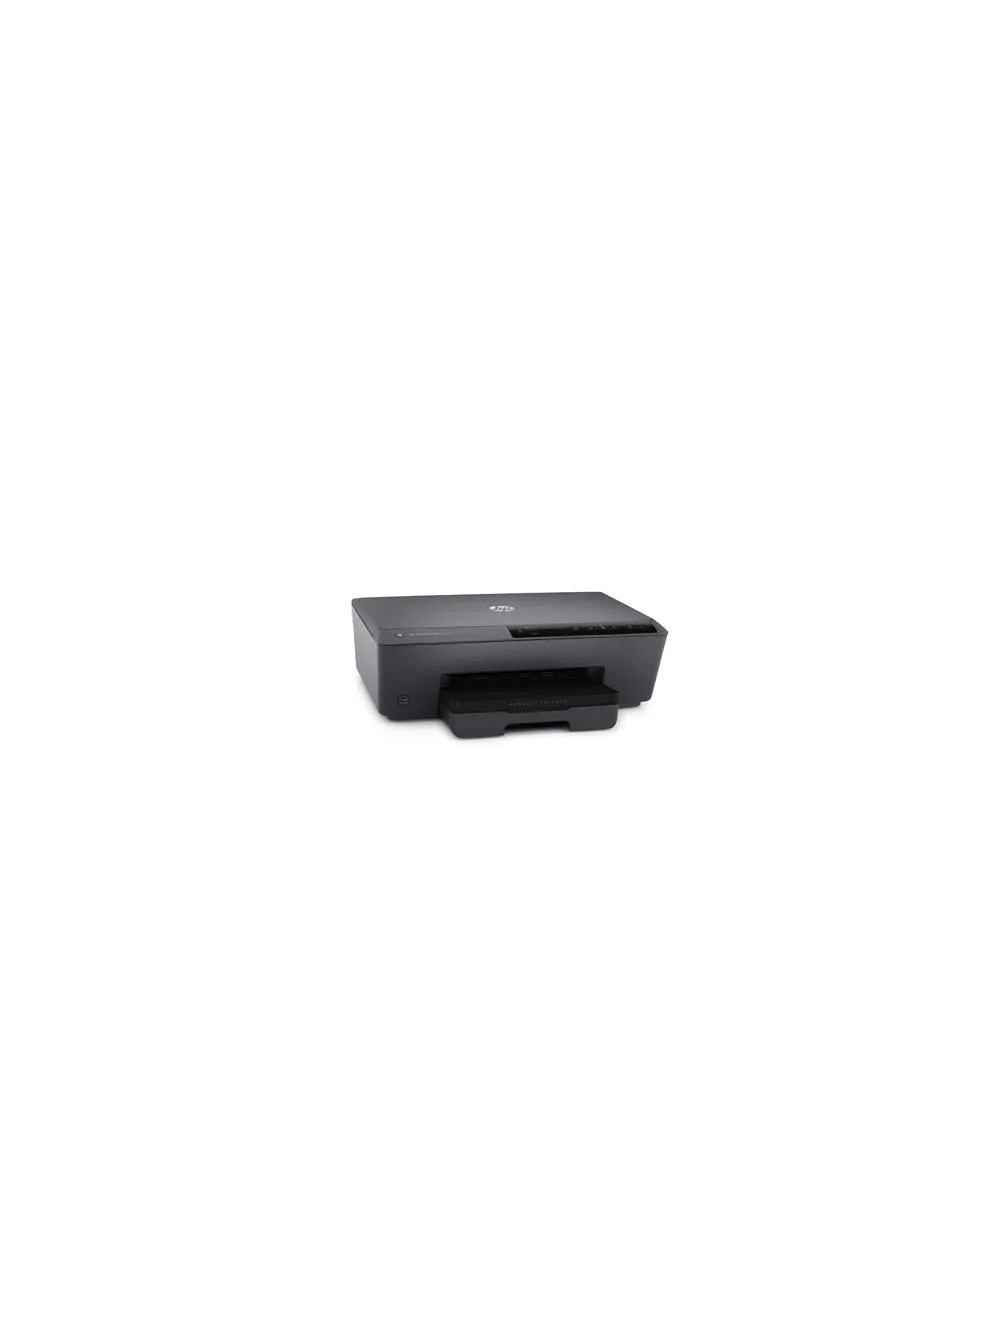 Printer Specifications for HP Officejet Pro 6230 ePrinters